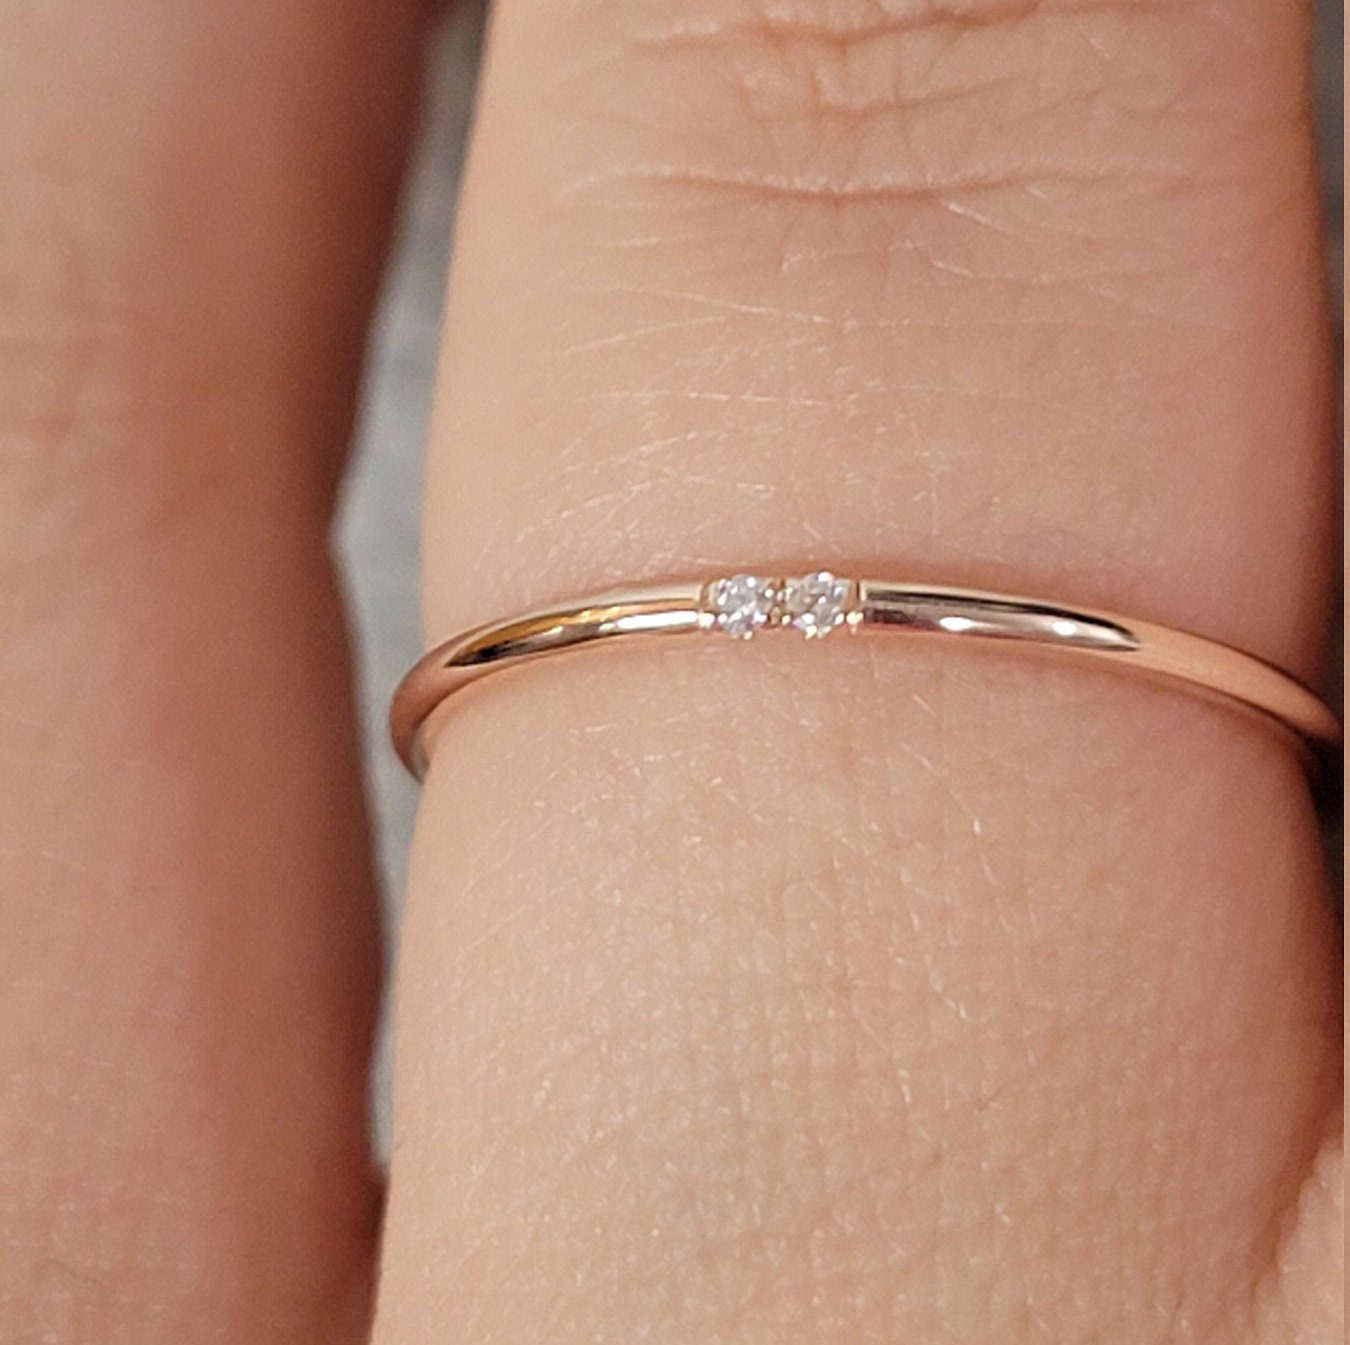 Amazon.com: Wedding Band, Diamond Ring, Minimalist Ring, Engagement Ring,  Flat Ring, 14K Gold Ring, Multistone Ring, 1.1mm, Gifts for Her : Handmade  Products